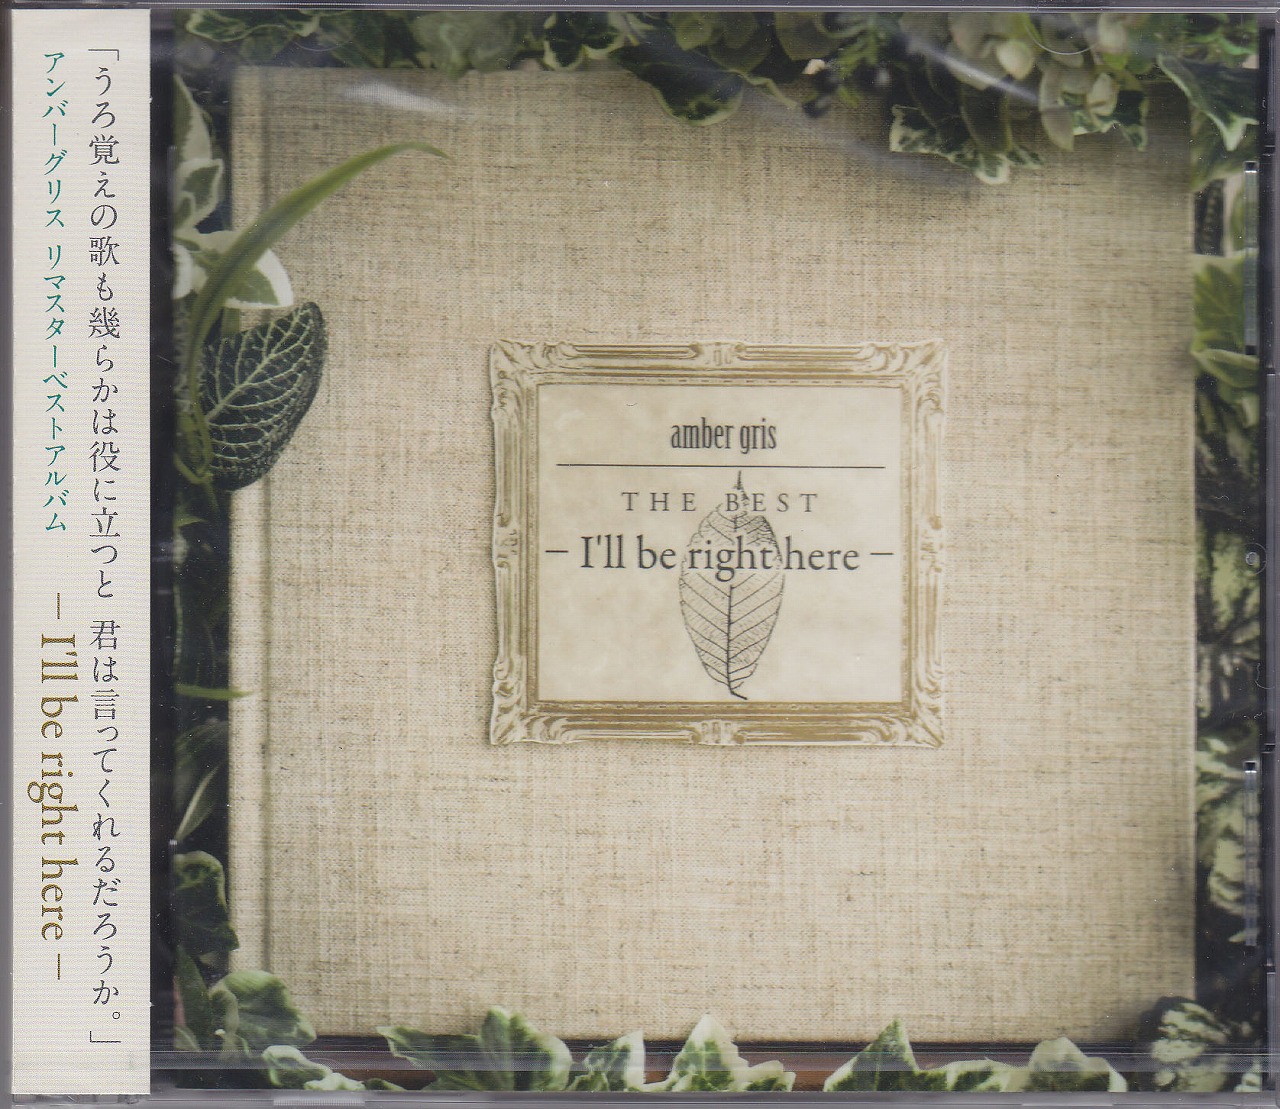 amber gris ( アンバーグリス )  の CD amber gris THE BEST - I’ll be right here -